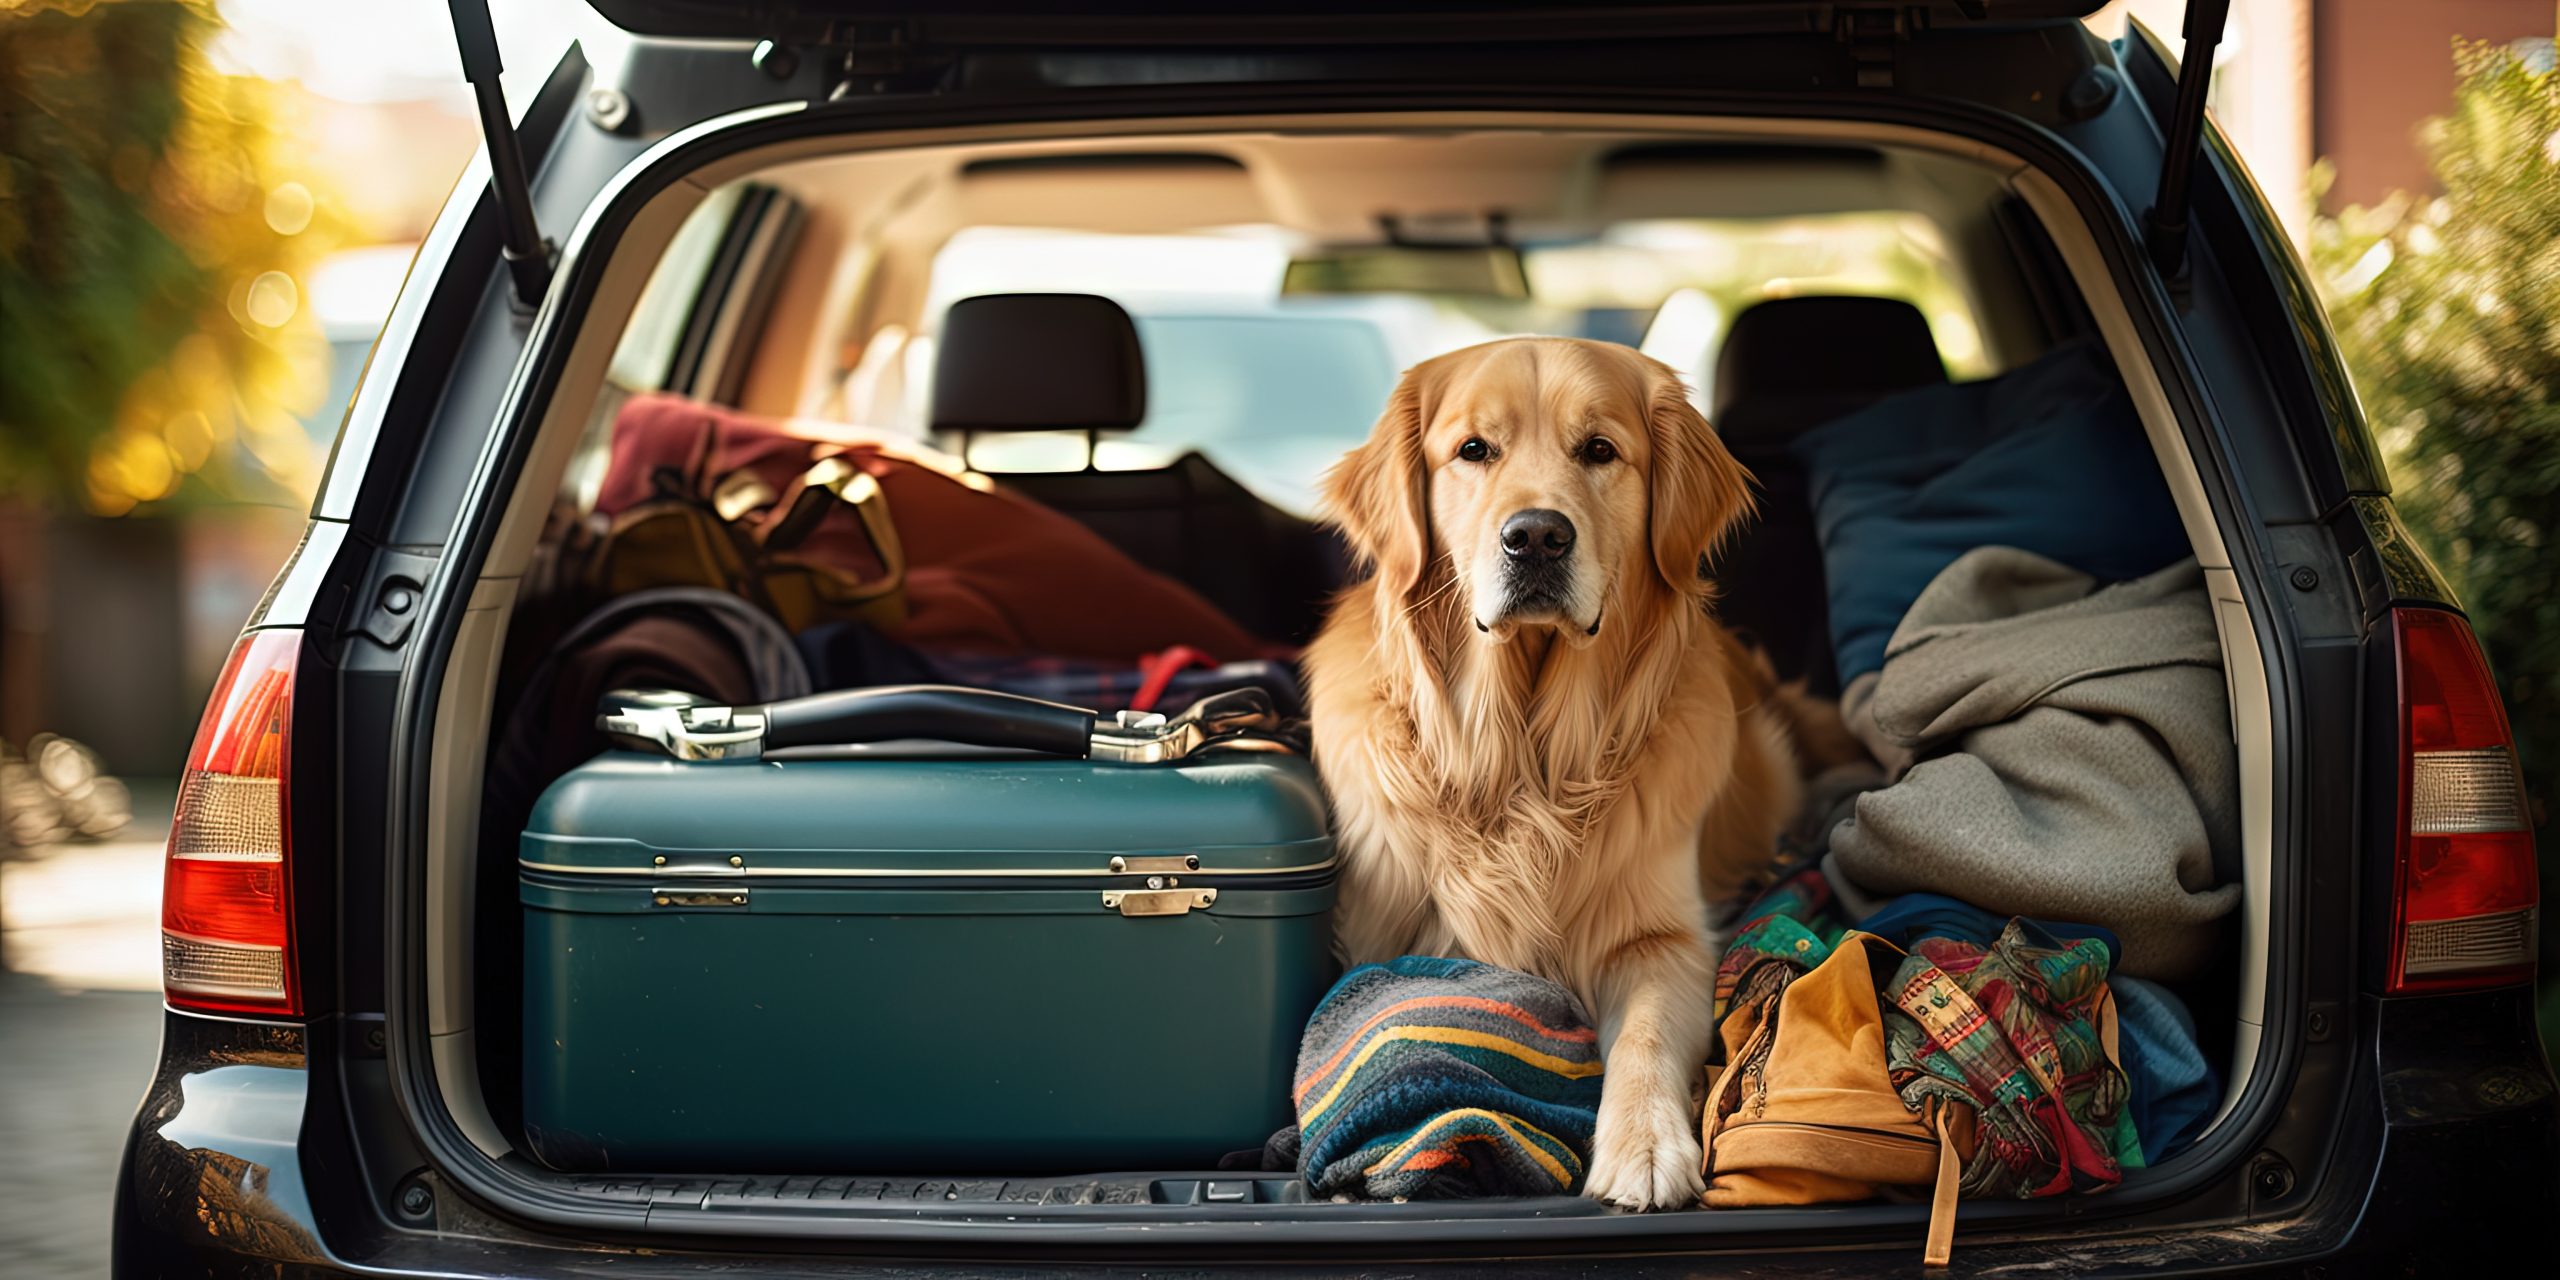 6 Pet Friendly Accommodations for your Festive Season Holiday!